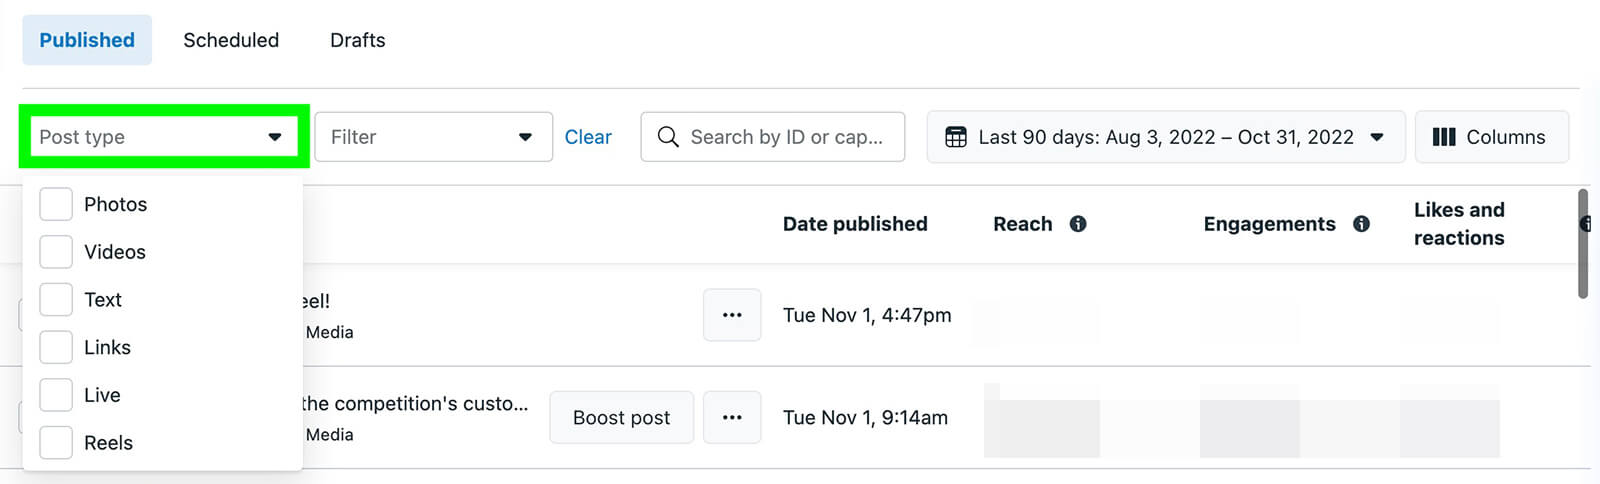 how-to-manage-posts-stories-and-more-in-the-content-tab-with-business-suite-organizes-post-type-filter-dropdown-basic-metrics-boost-example-5